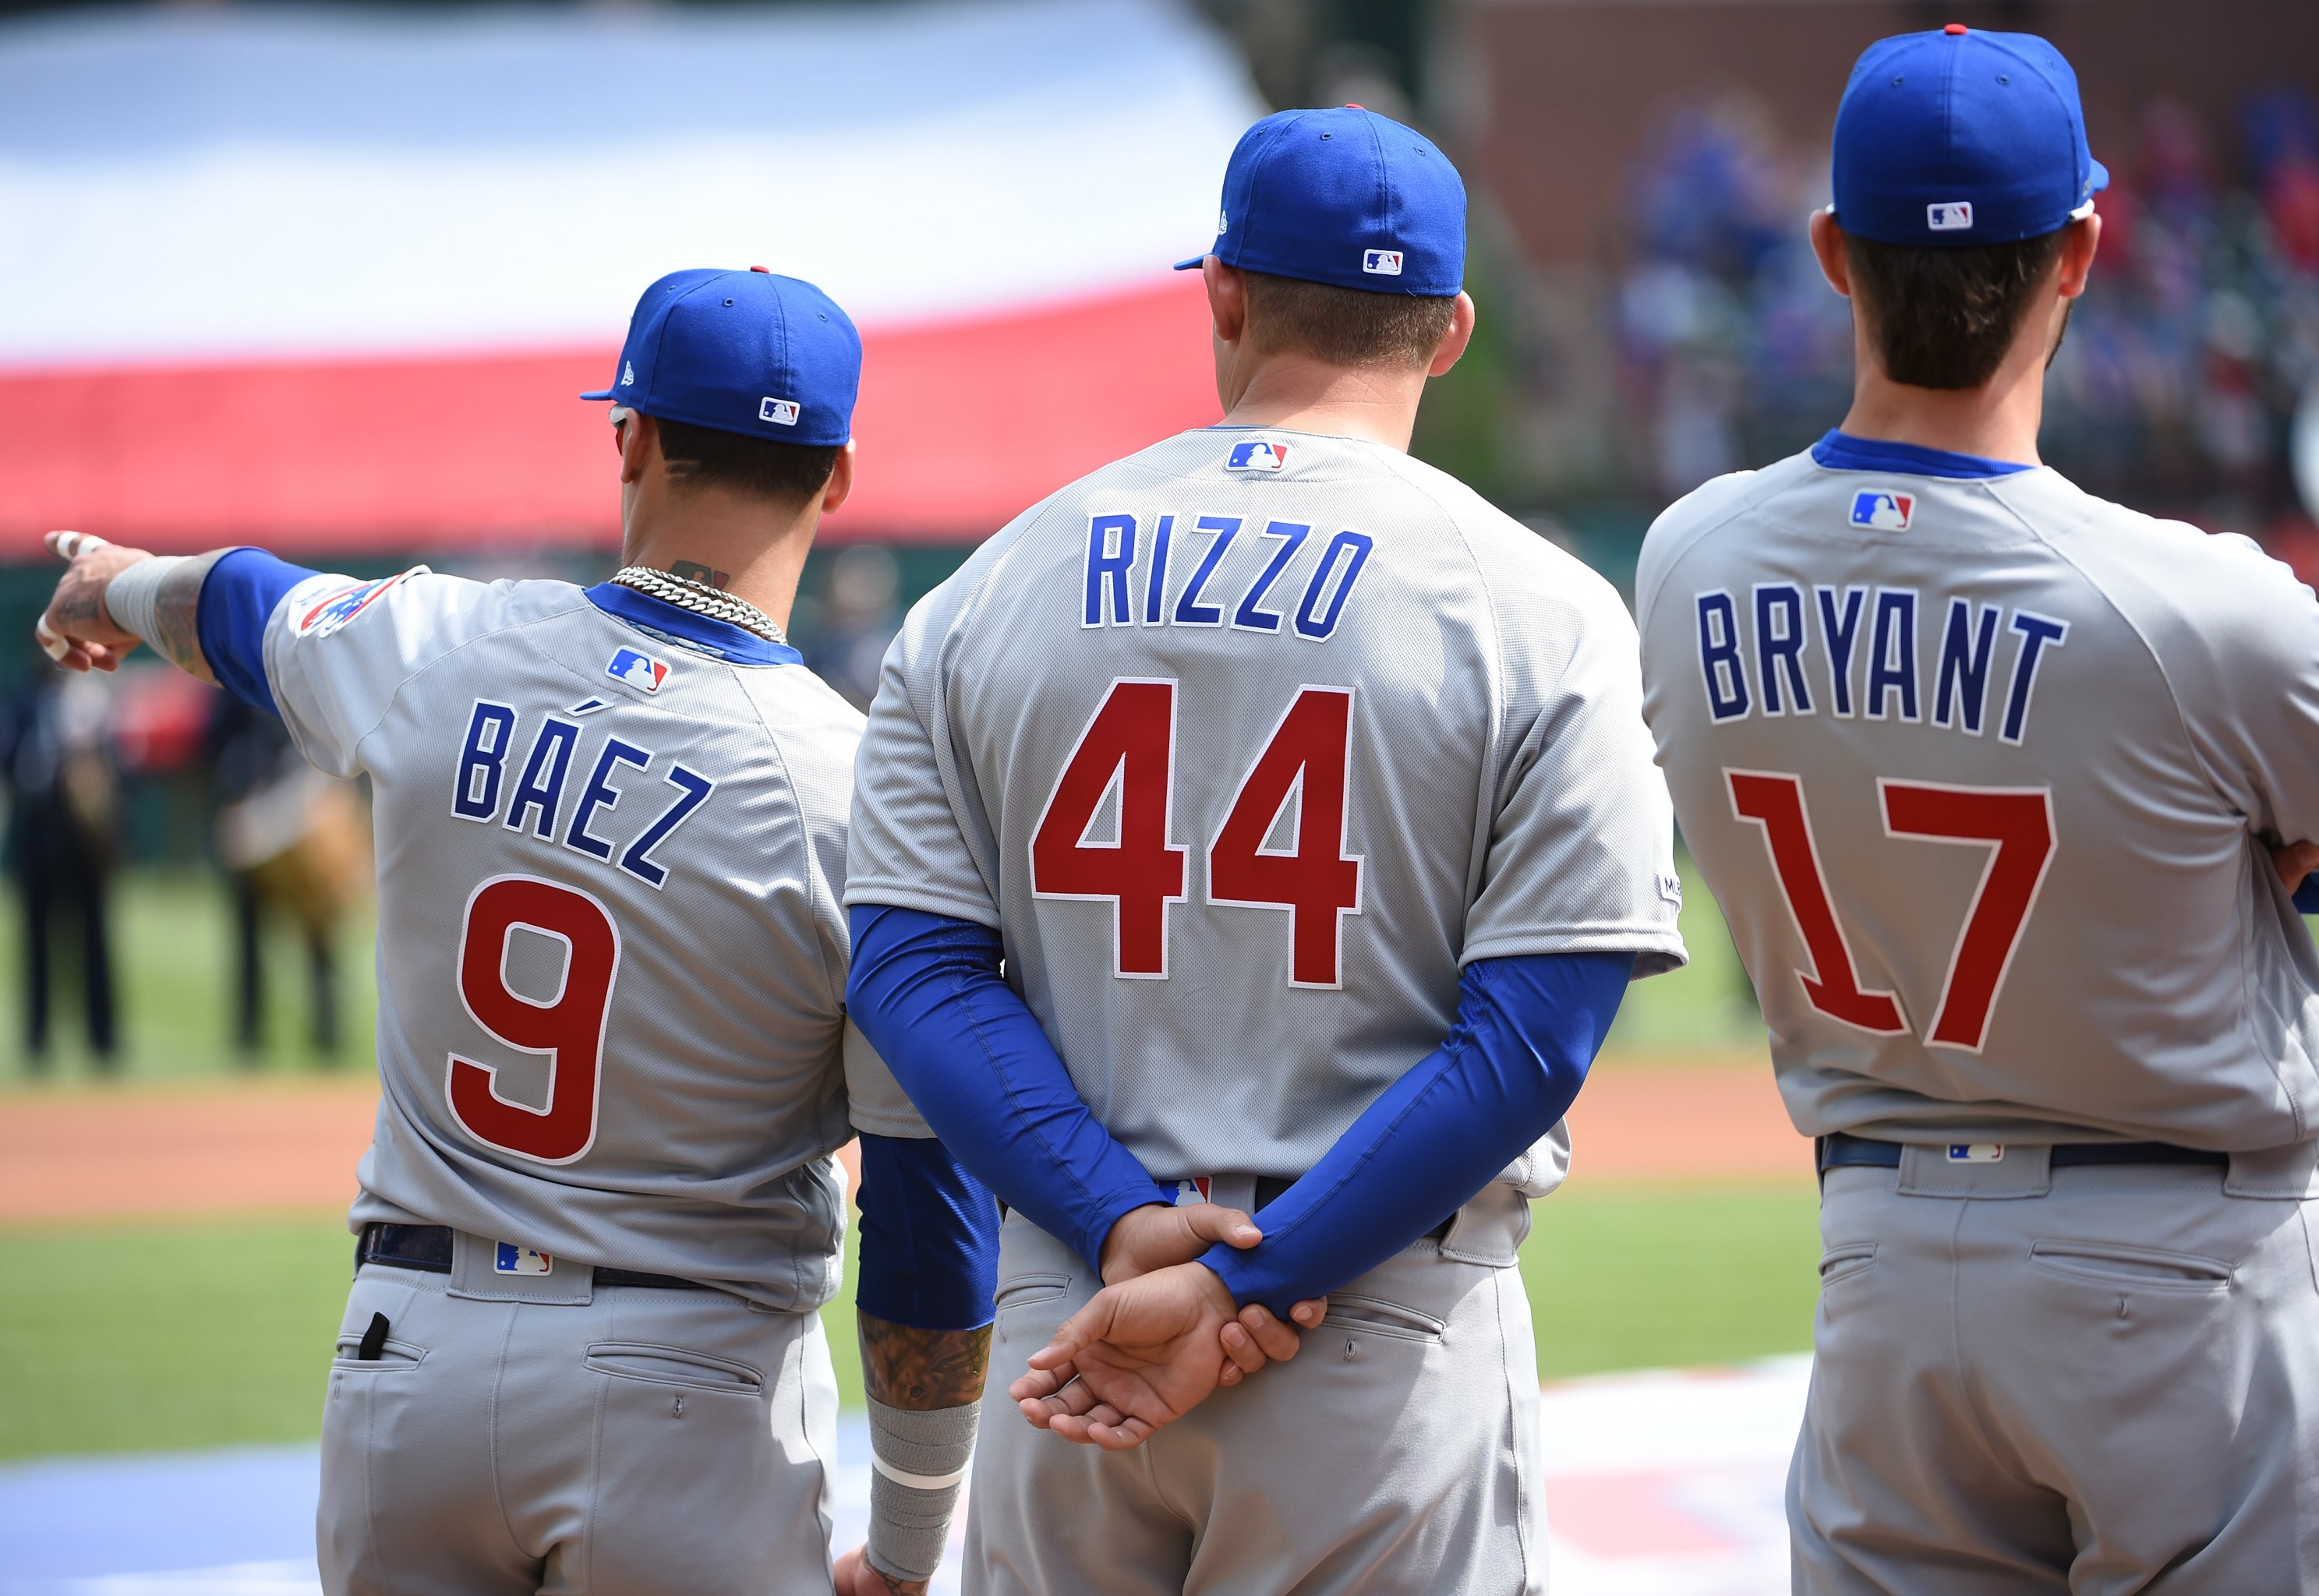 Rizzo's 14 pitch battle ends with game tying home run, a breakdown 